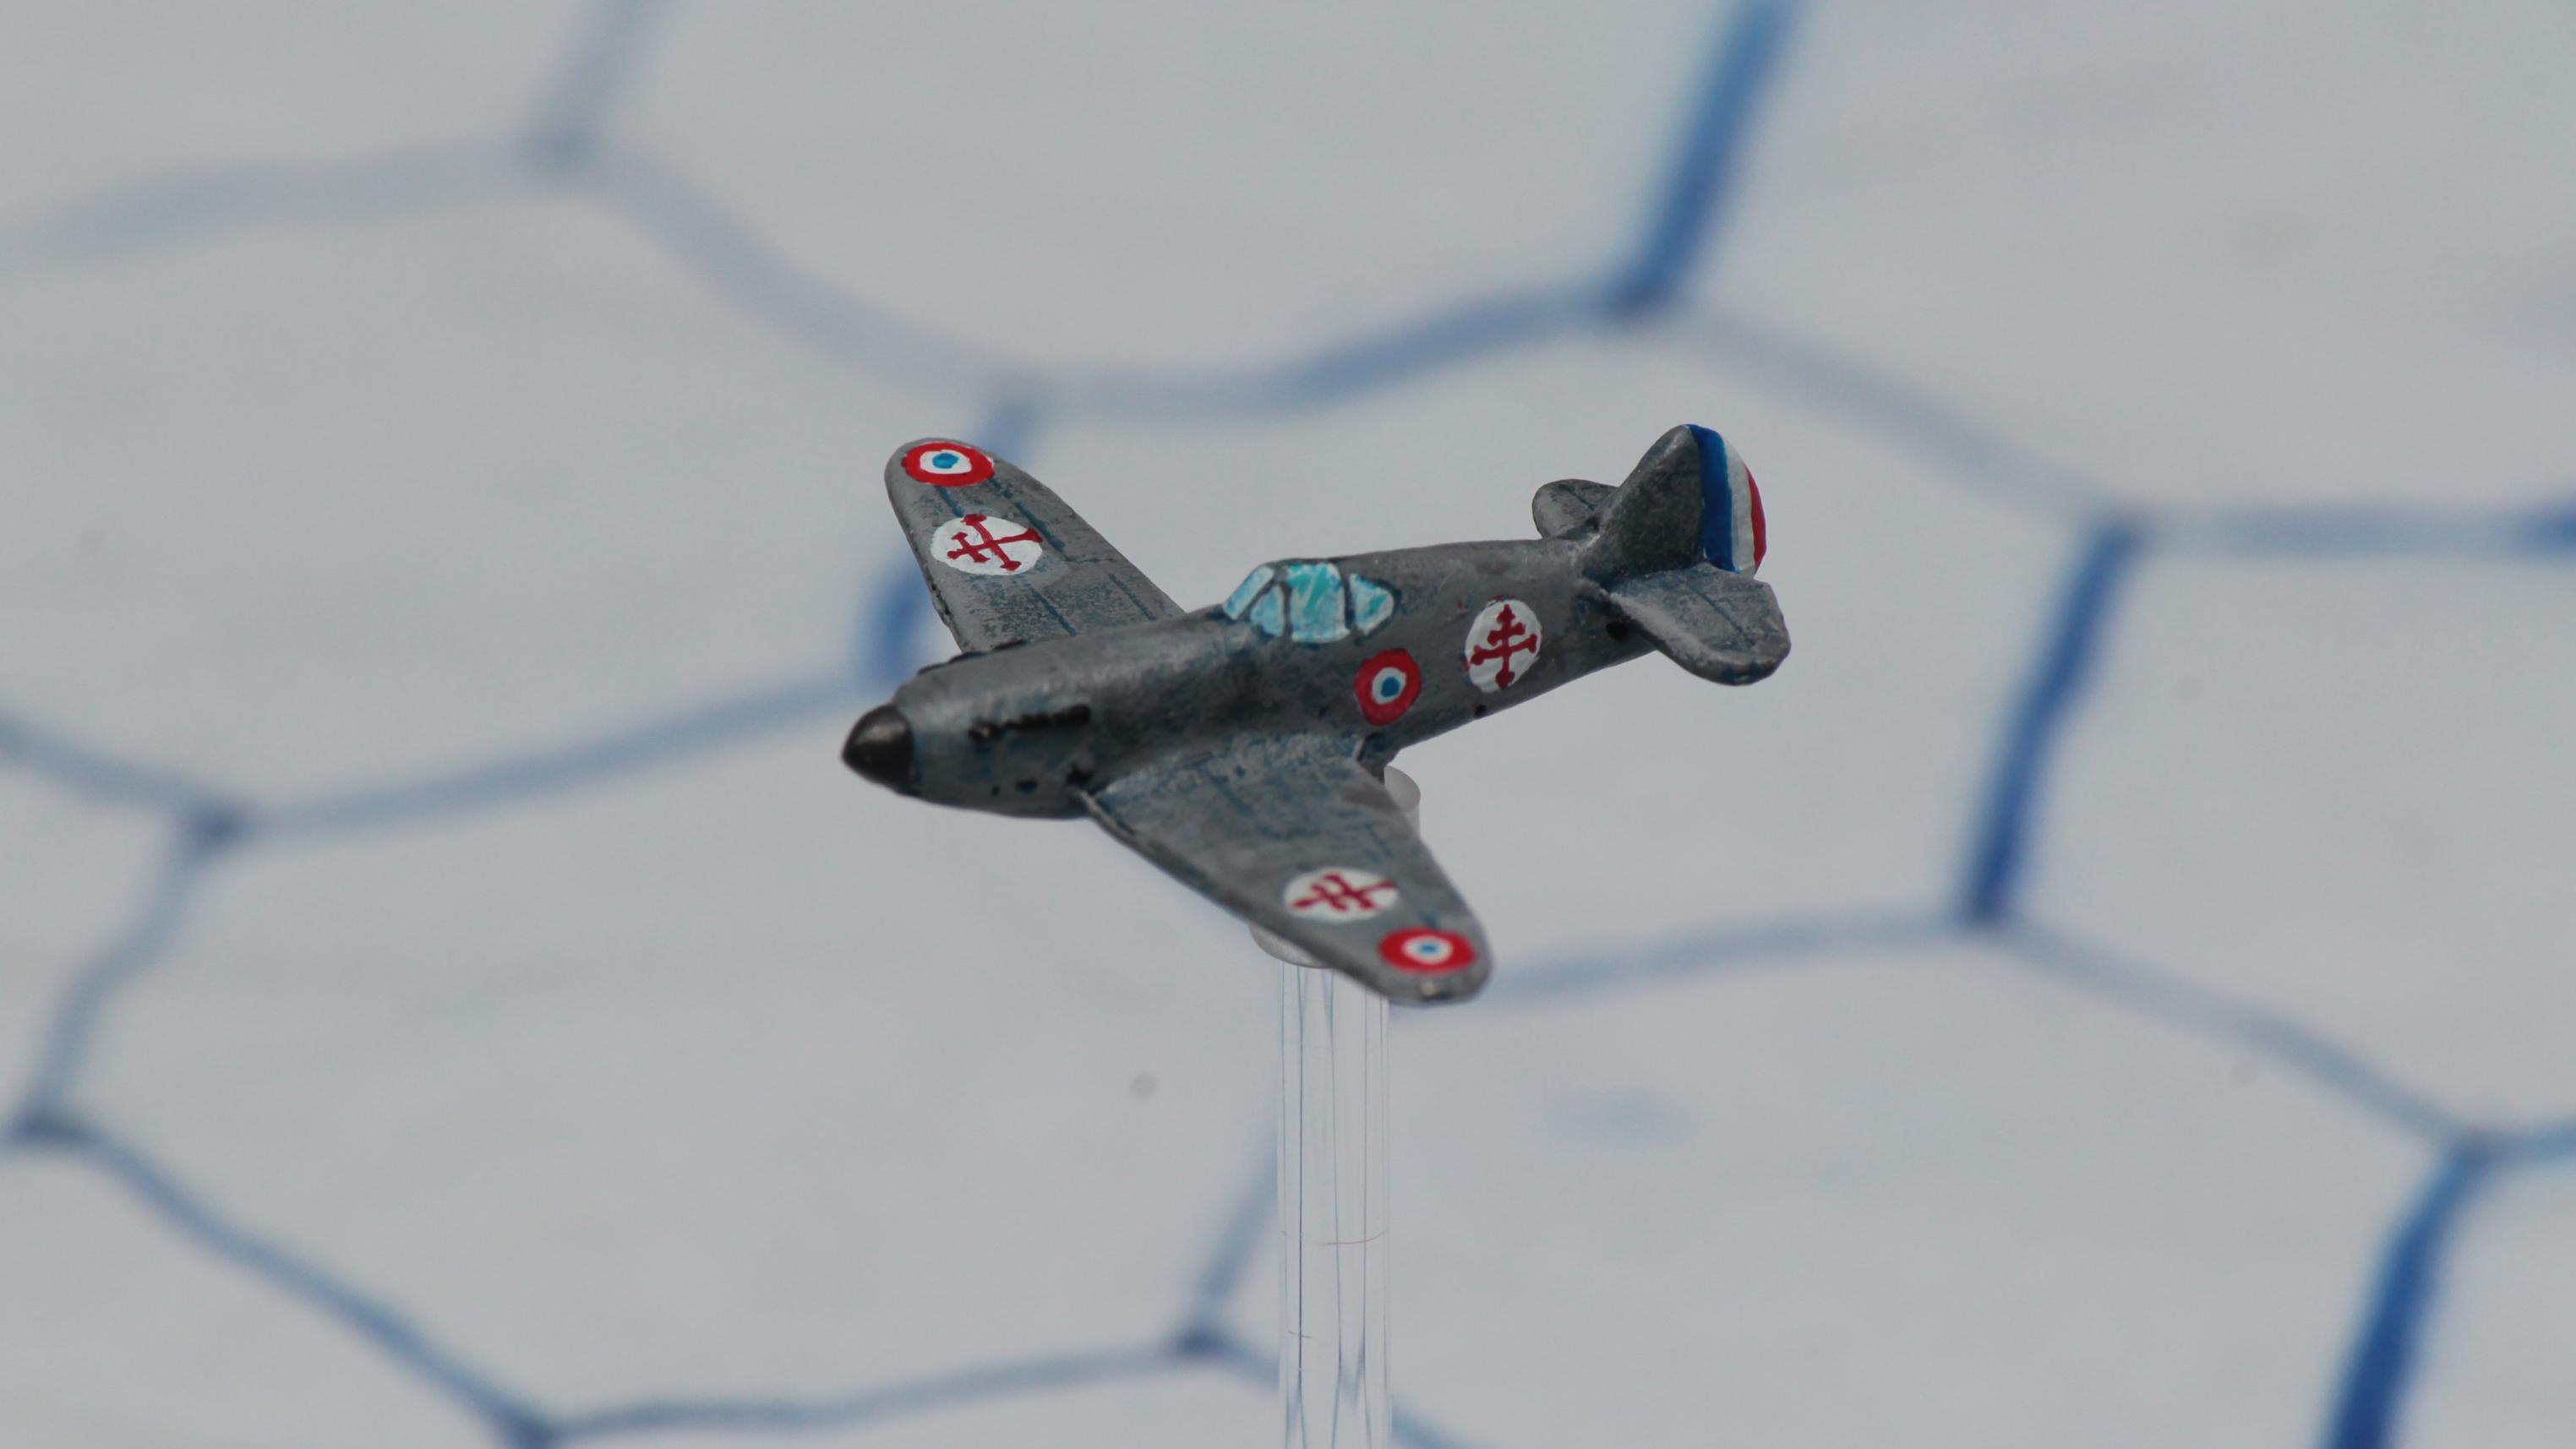 1:300 Scale, 6mm, 6mm Scale, Air Combat, Aircraft, Arm&eacute;e De L'air, Aviation, Finland, Fliers, France, French, Germans, Historic, Imperial Japan, Italian, Luftwaffe, Raf, Republic Of China, Soviet, Usaaf, World War 2